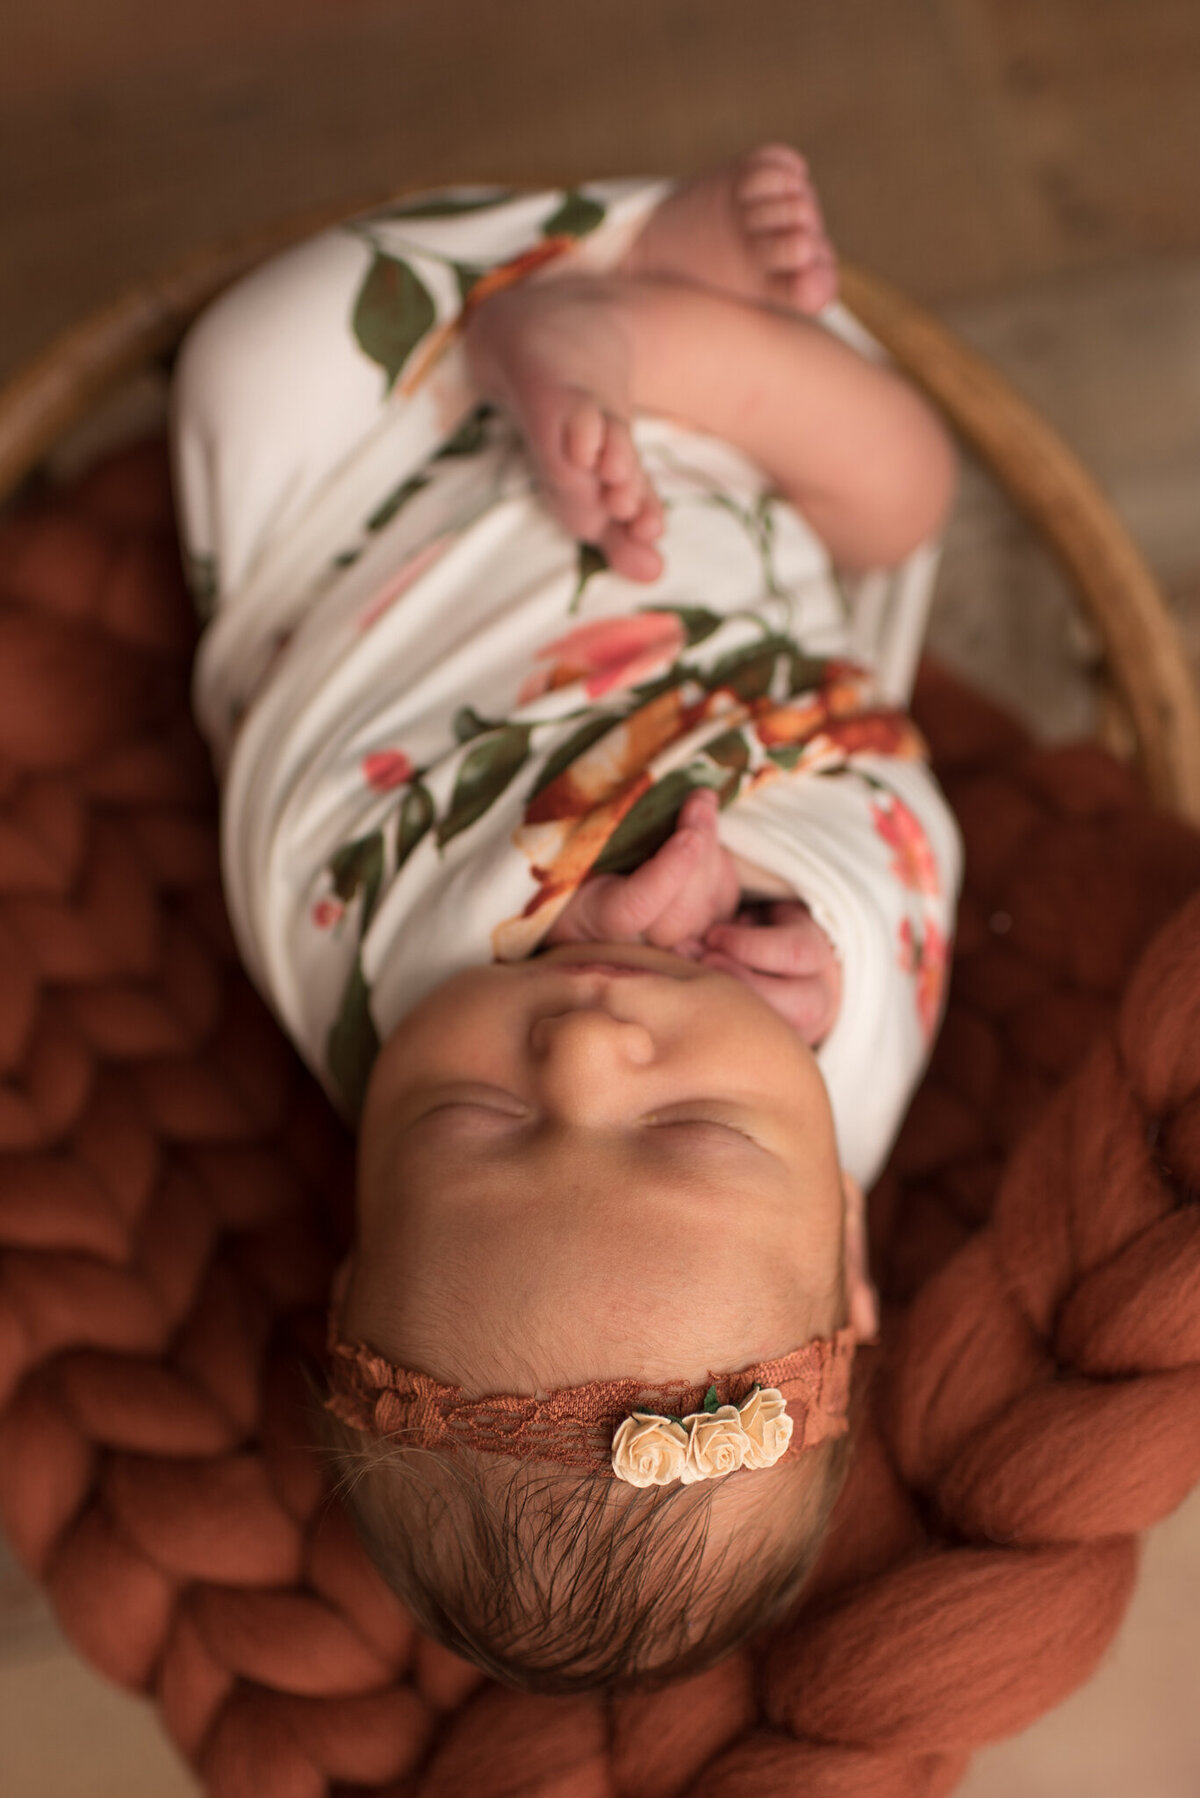 Baby girl wrapped in floral wrap with orange headband and basket